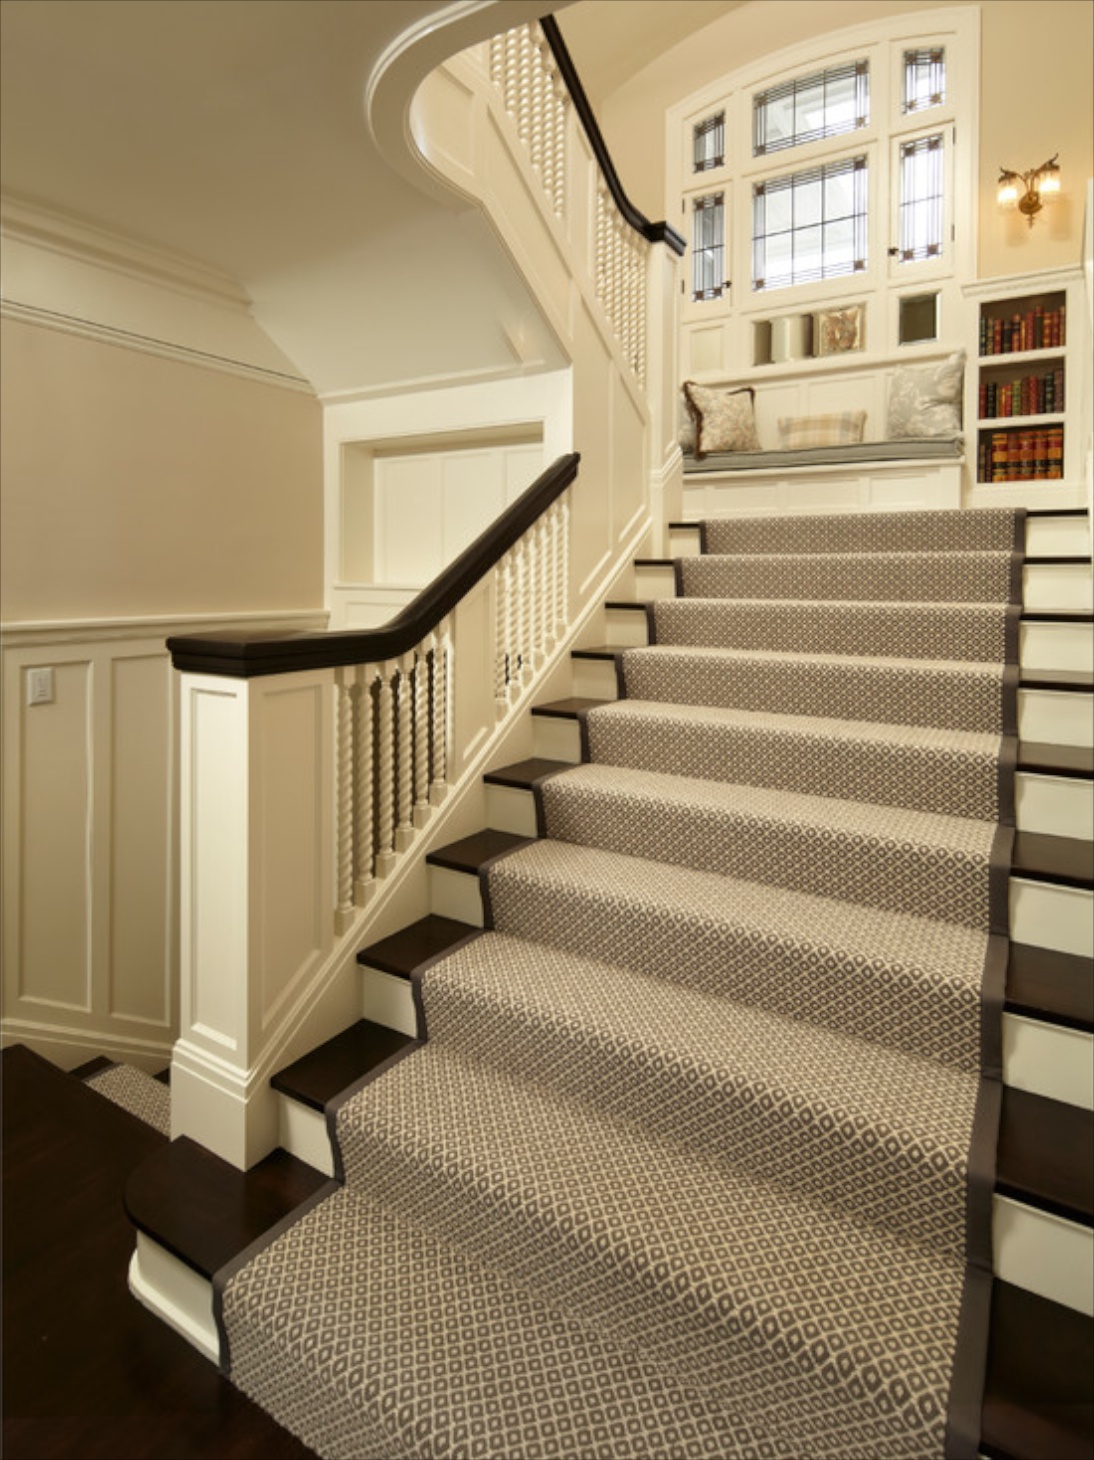 Carpet stairs carpeting stairs colors KYZEZYE